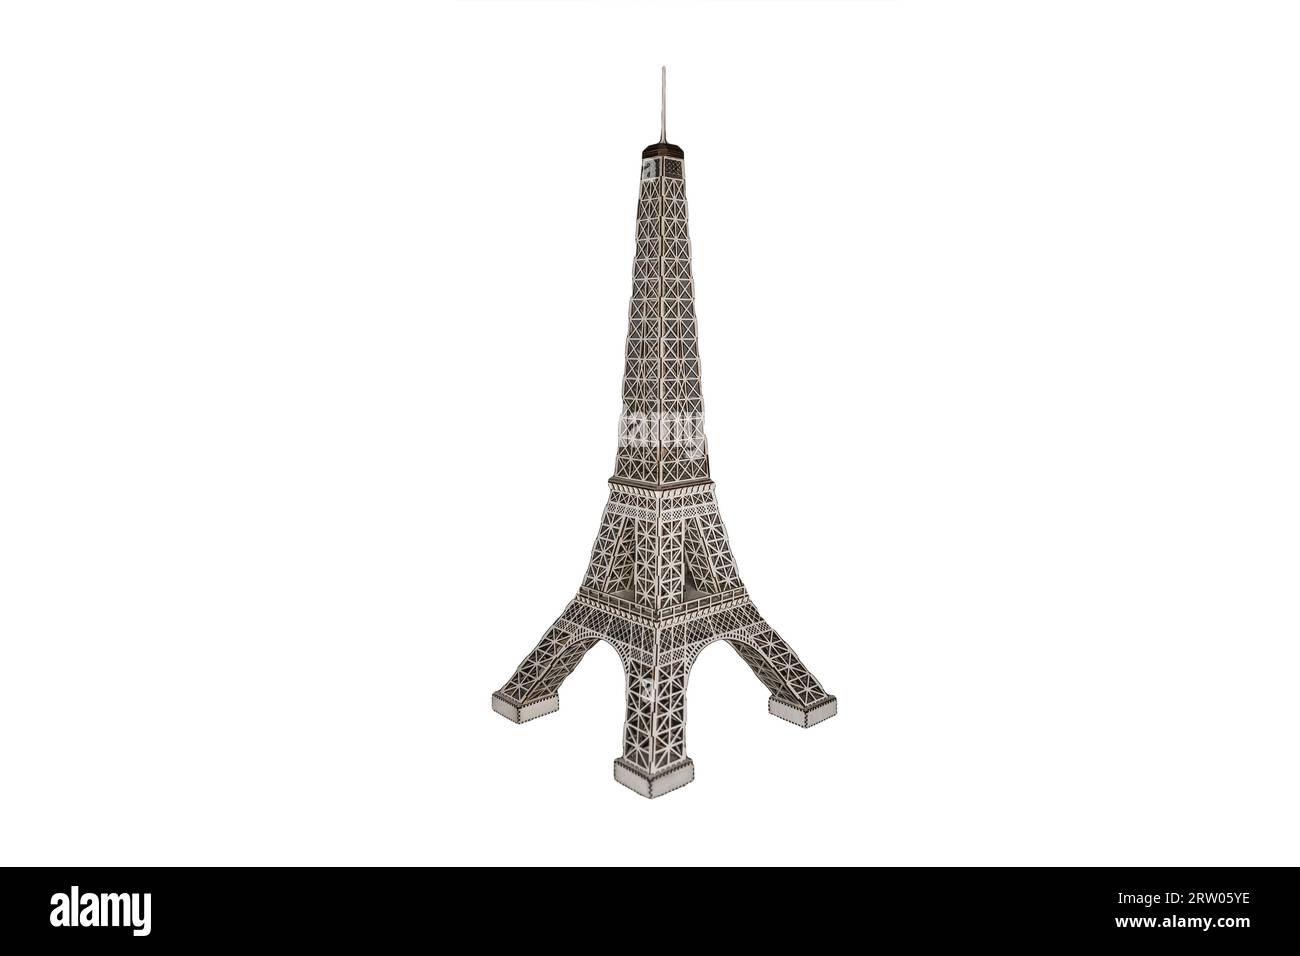 Eiffel Tower figurine made of simple material on white isolated background. Stock Photo